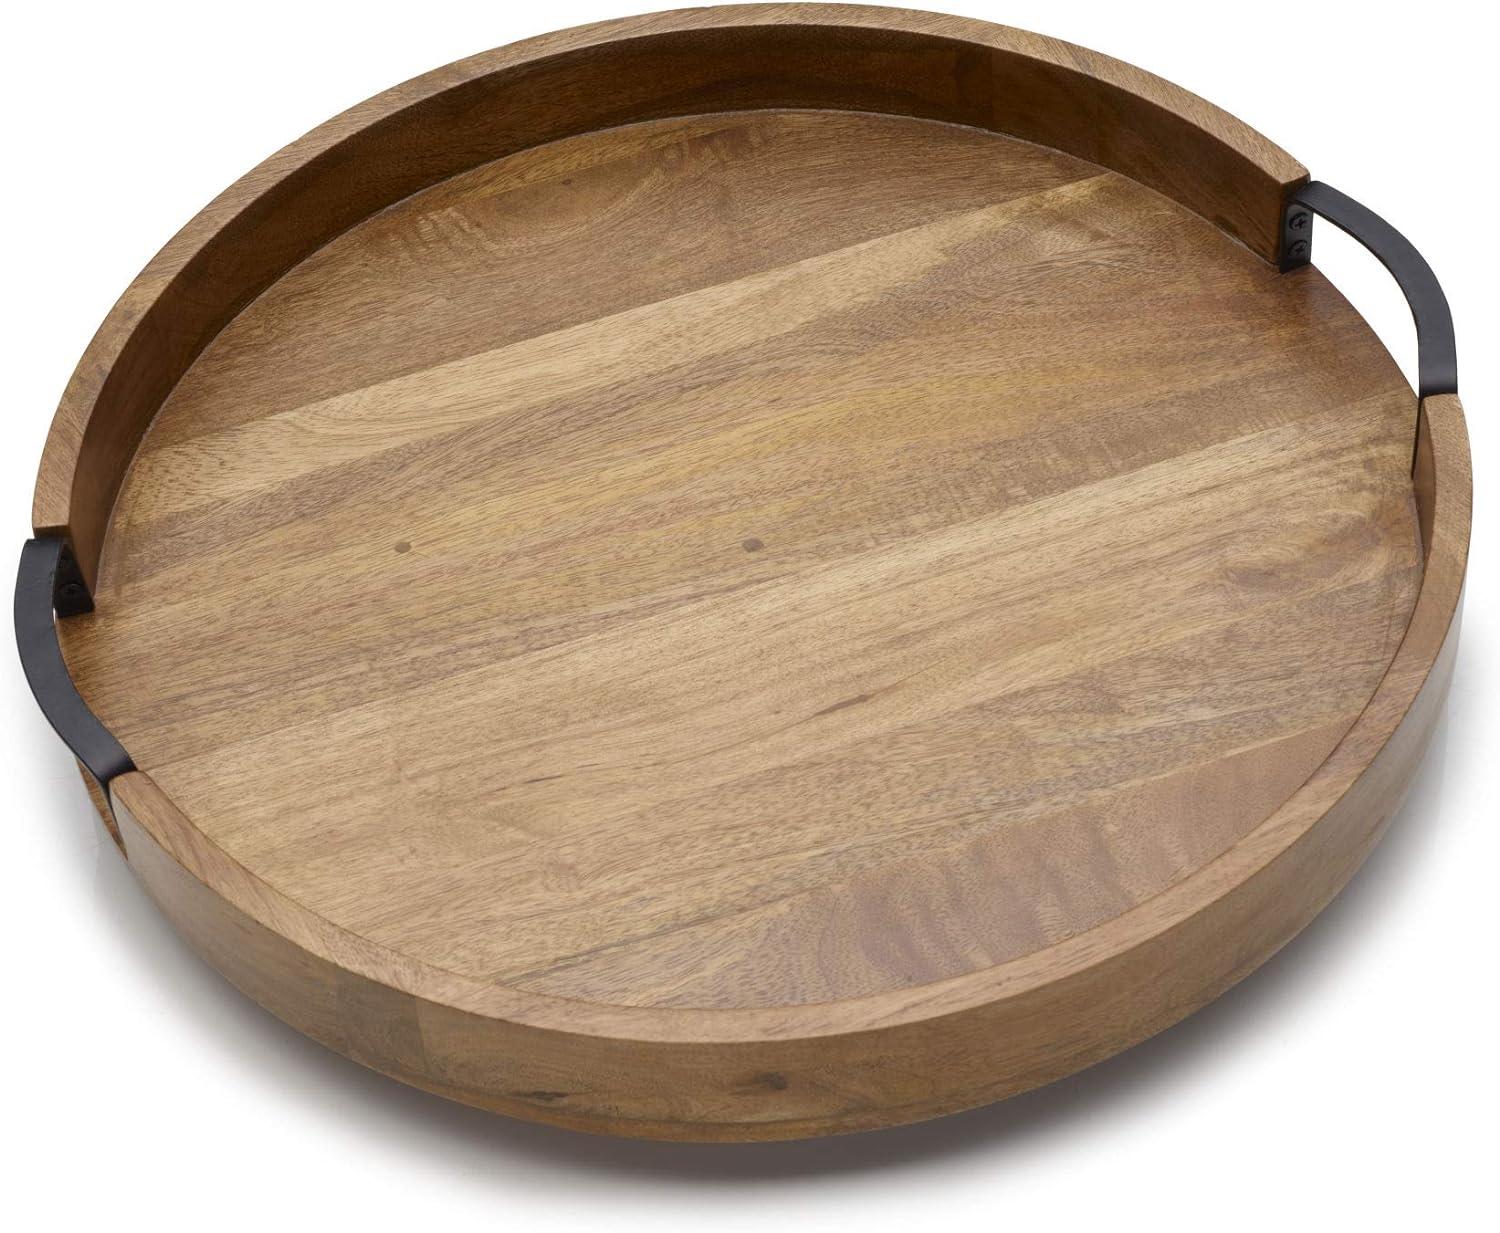 Mango Wood Round Lazy Susan Serving Tray with Iron Handles